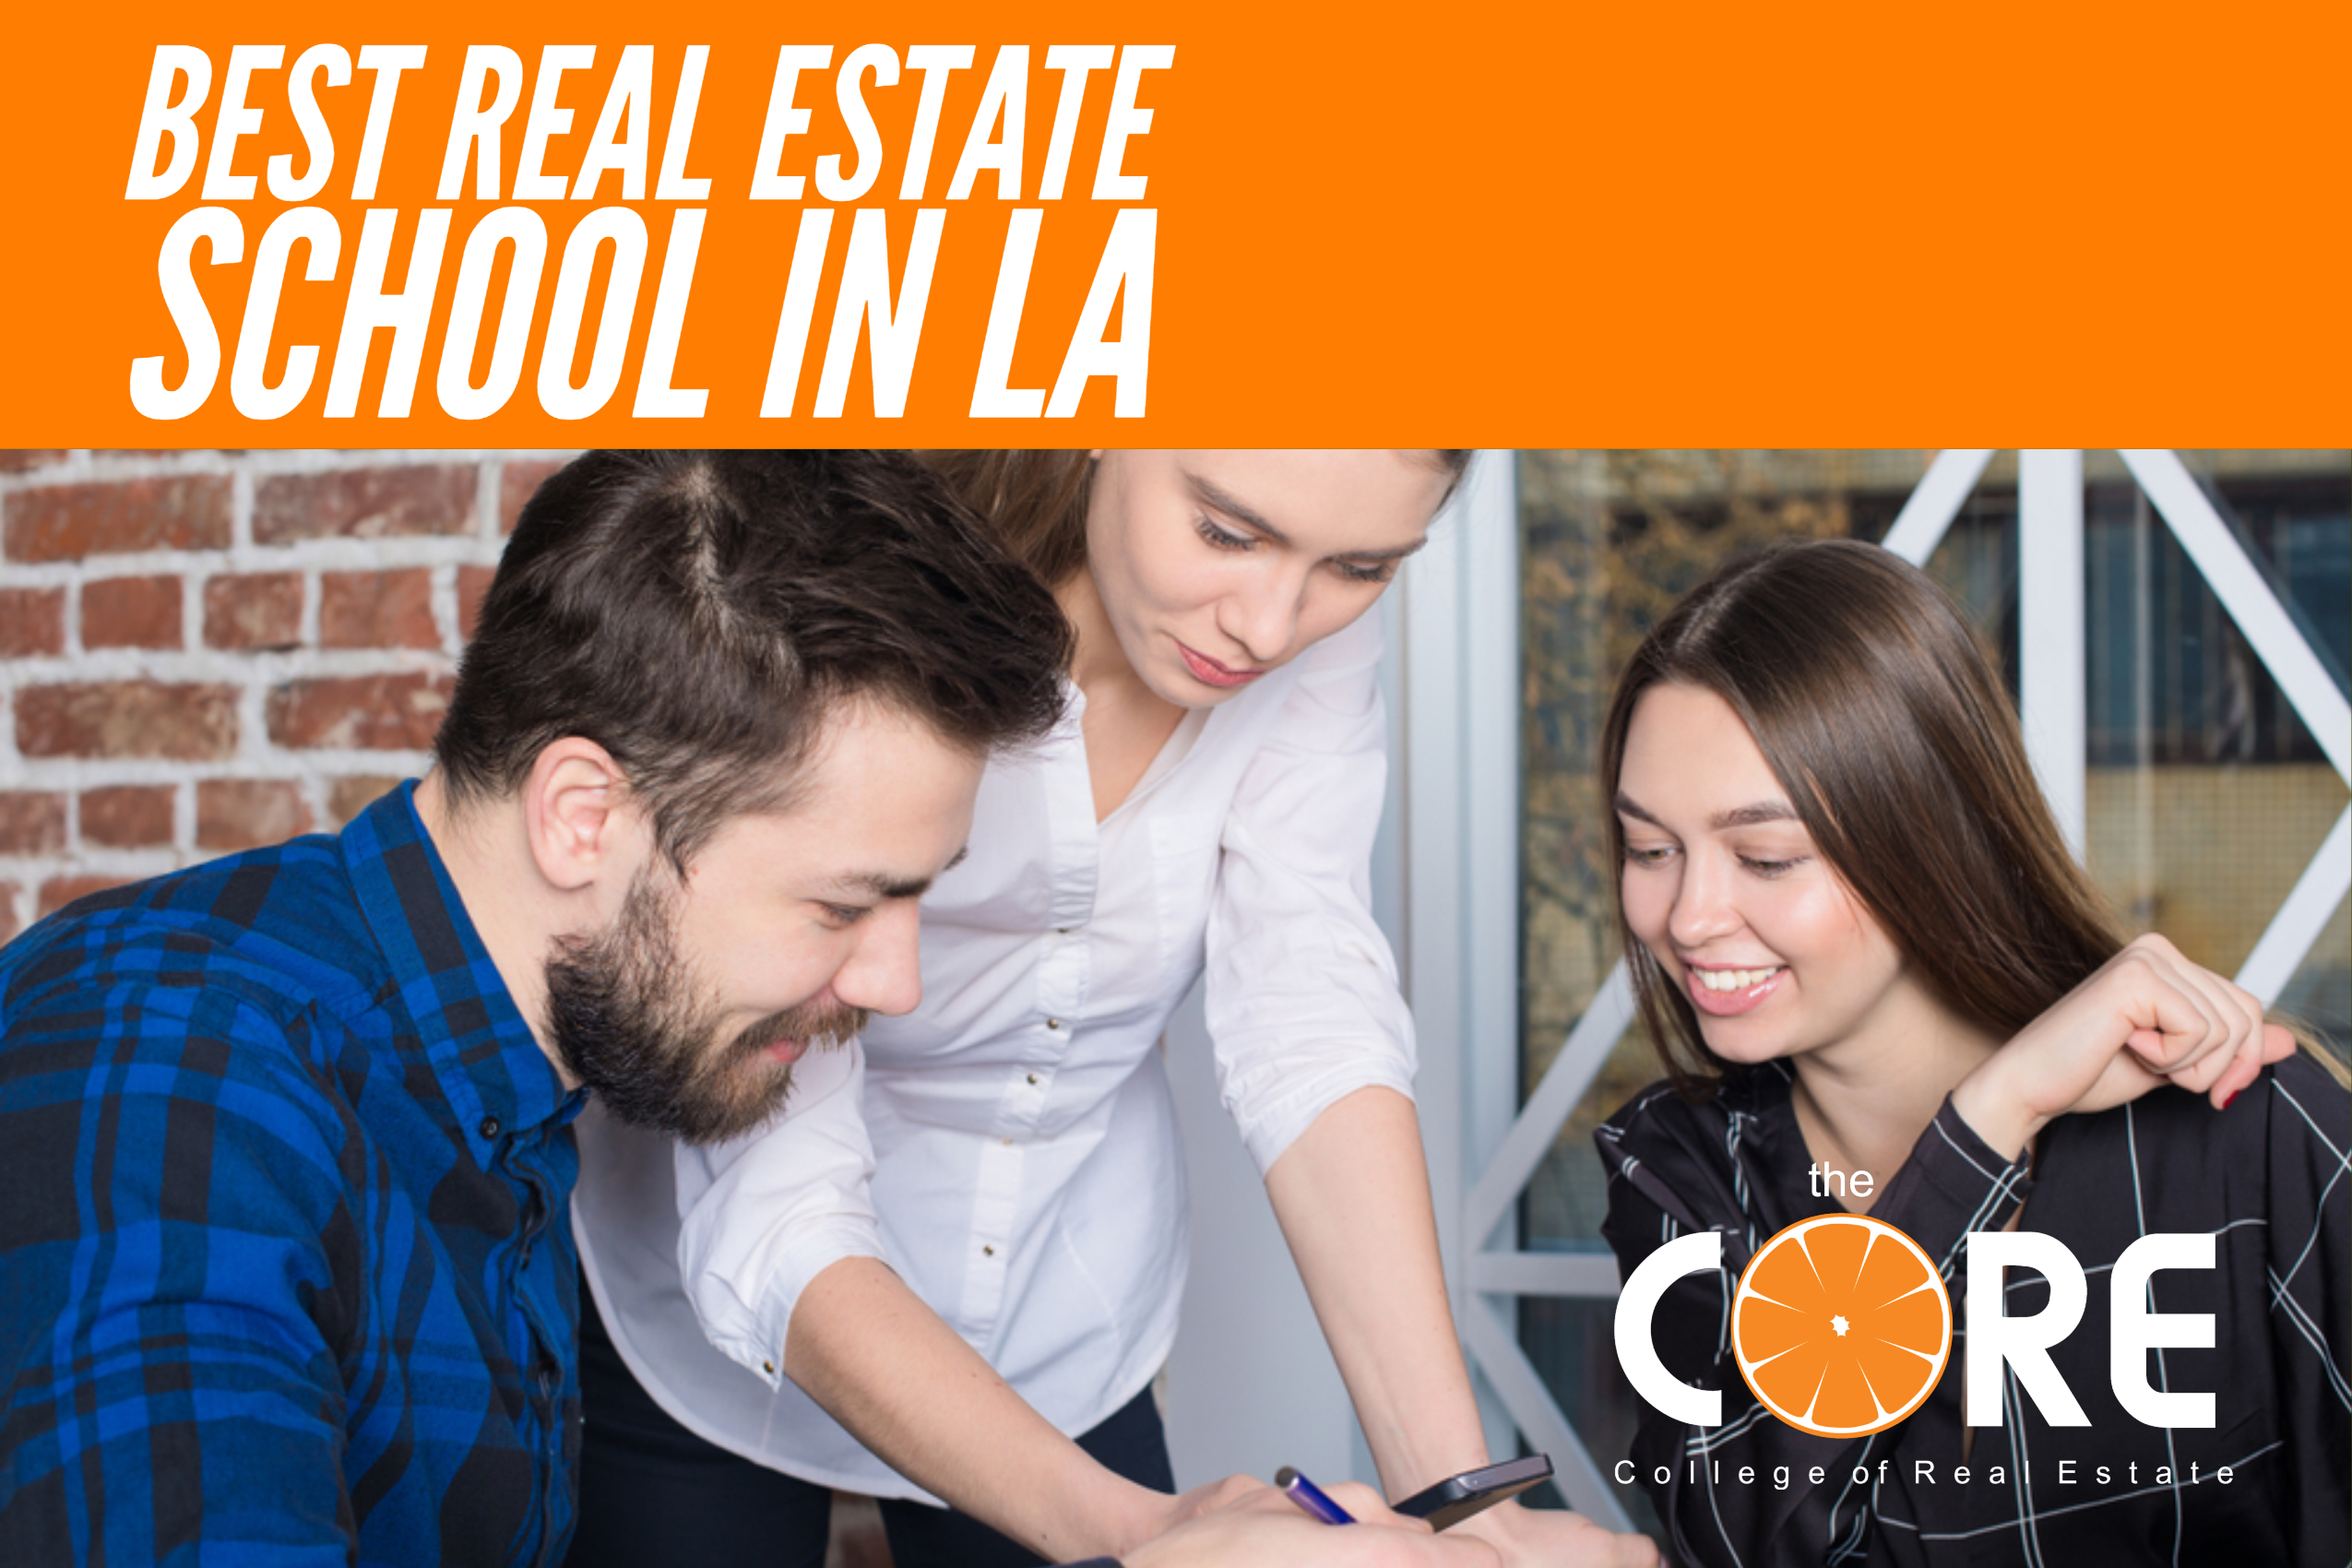 Get-Your-Real-Estate-License-Silverlake-Real-Estate-School-College-of-Real-Estate-theCORE.